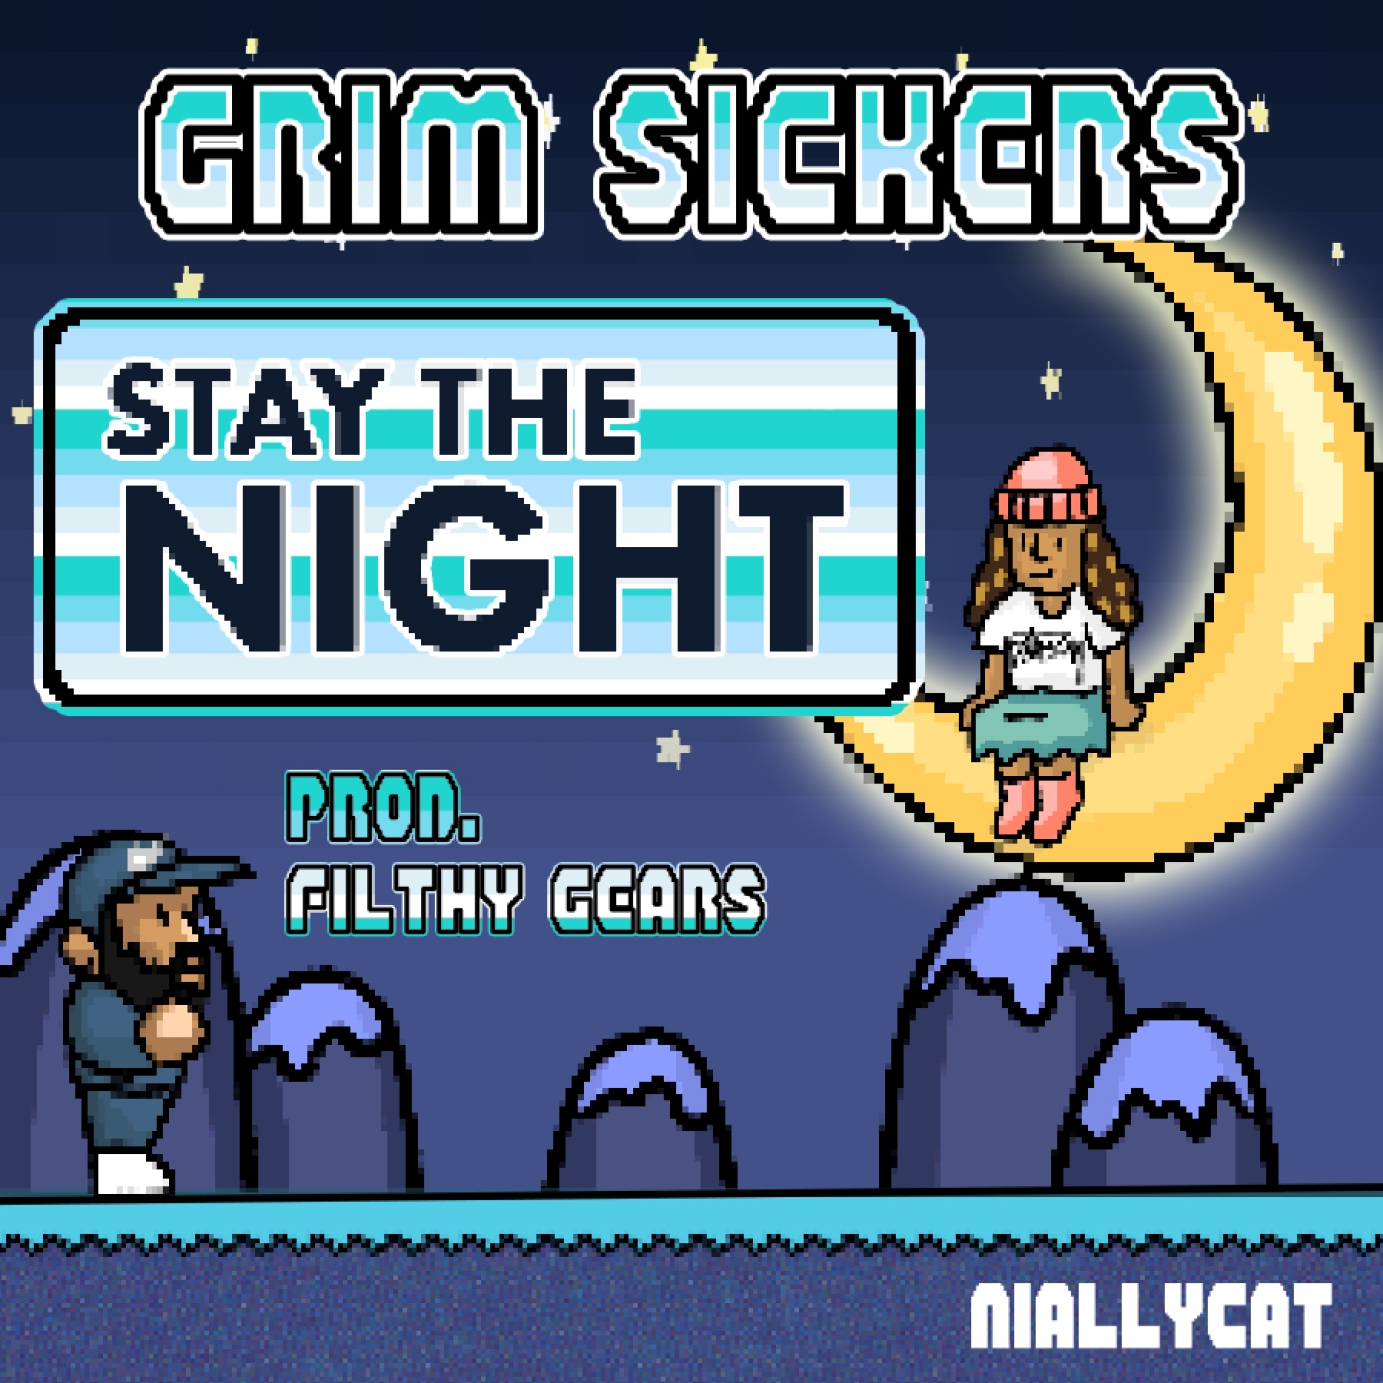 Music video for Grim Sickers by Niallycat